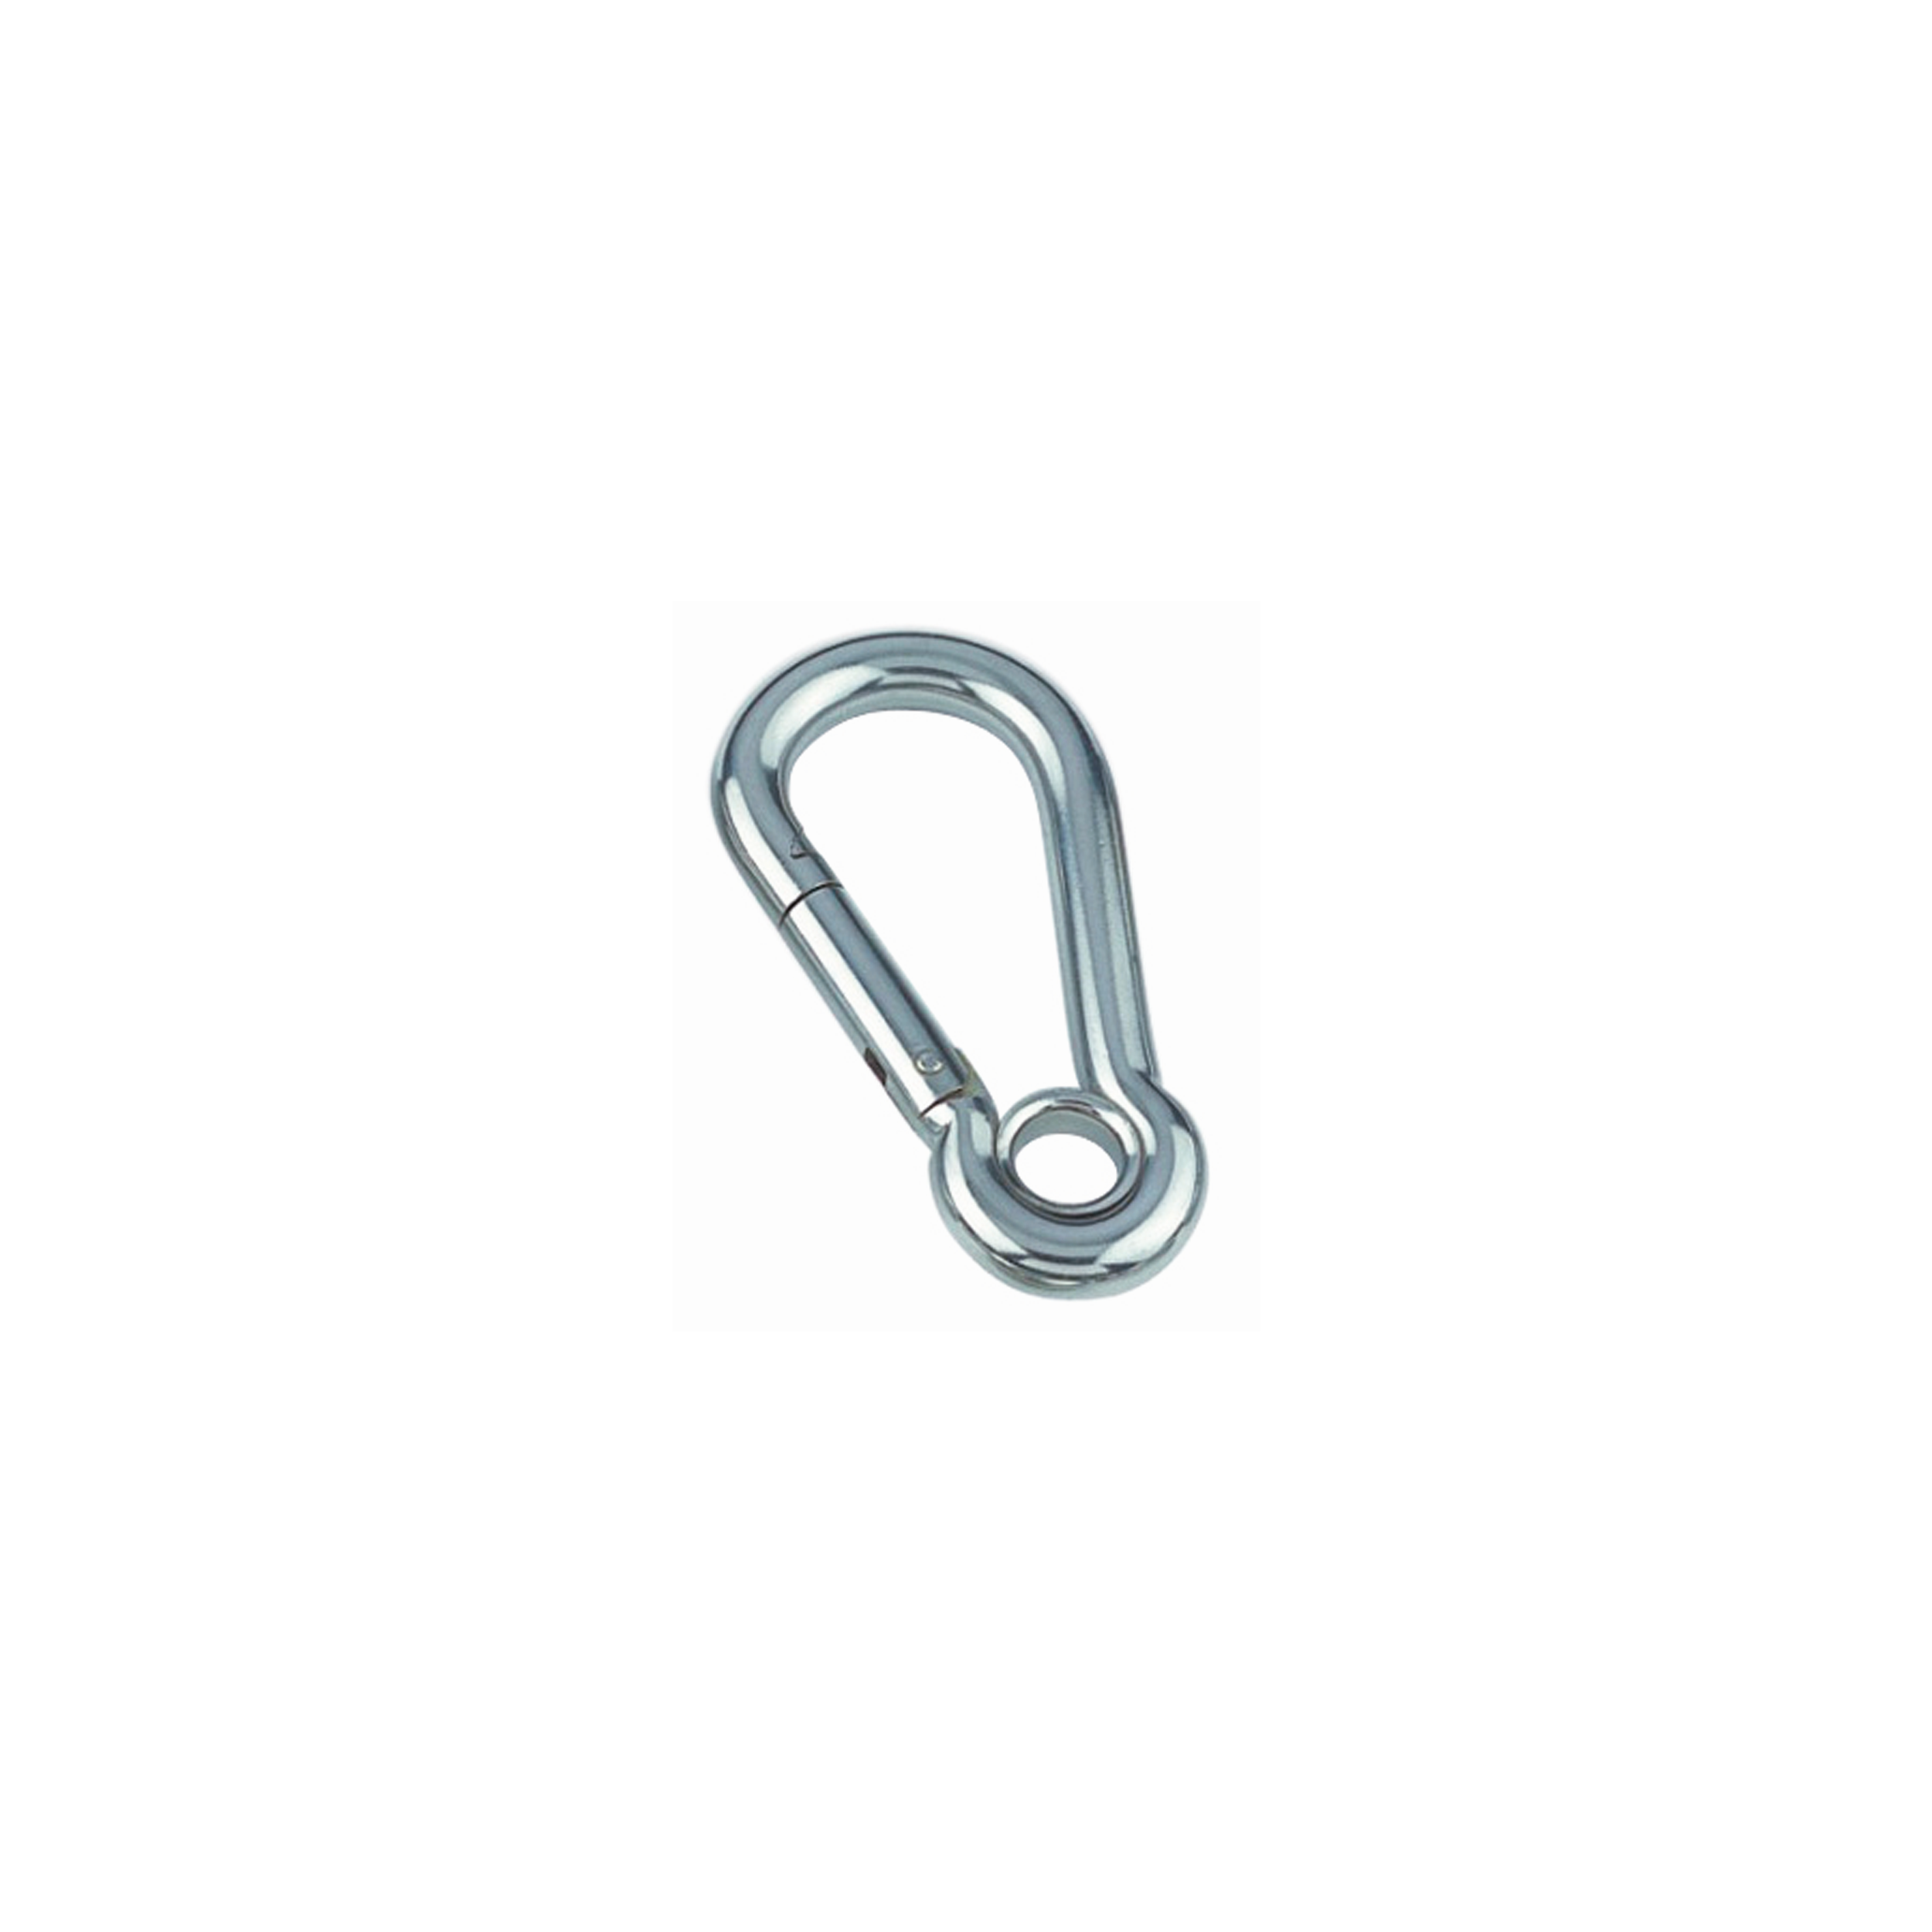 10 STCK / PCS. Spring hook with eyelet A4  8x80mm